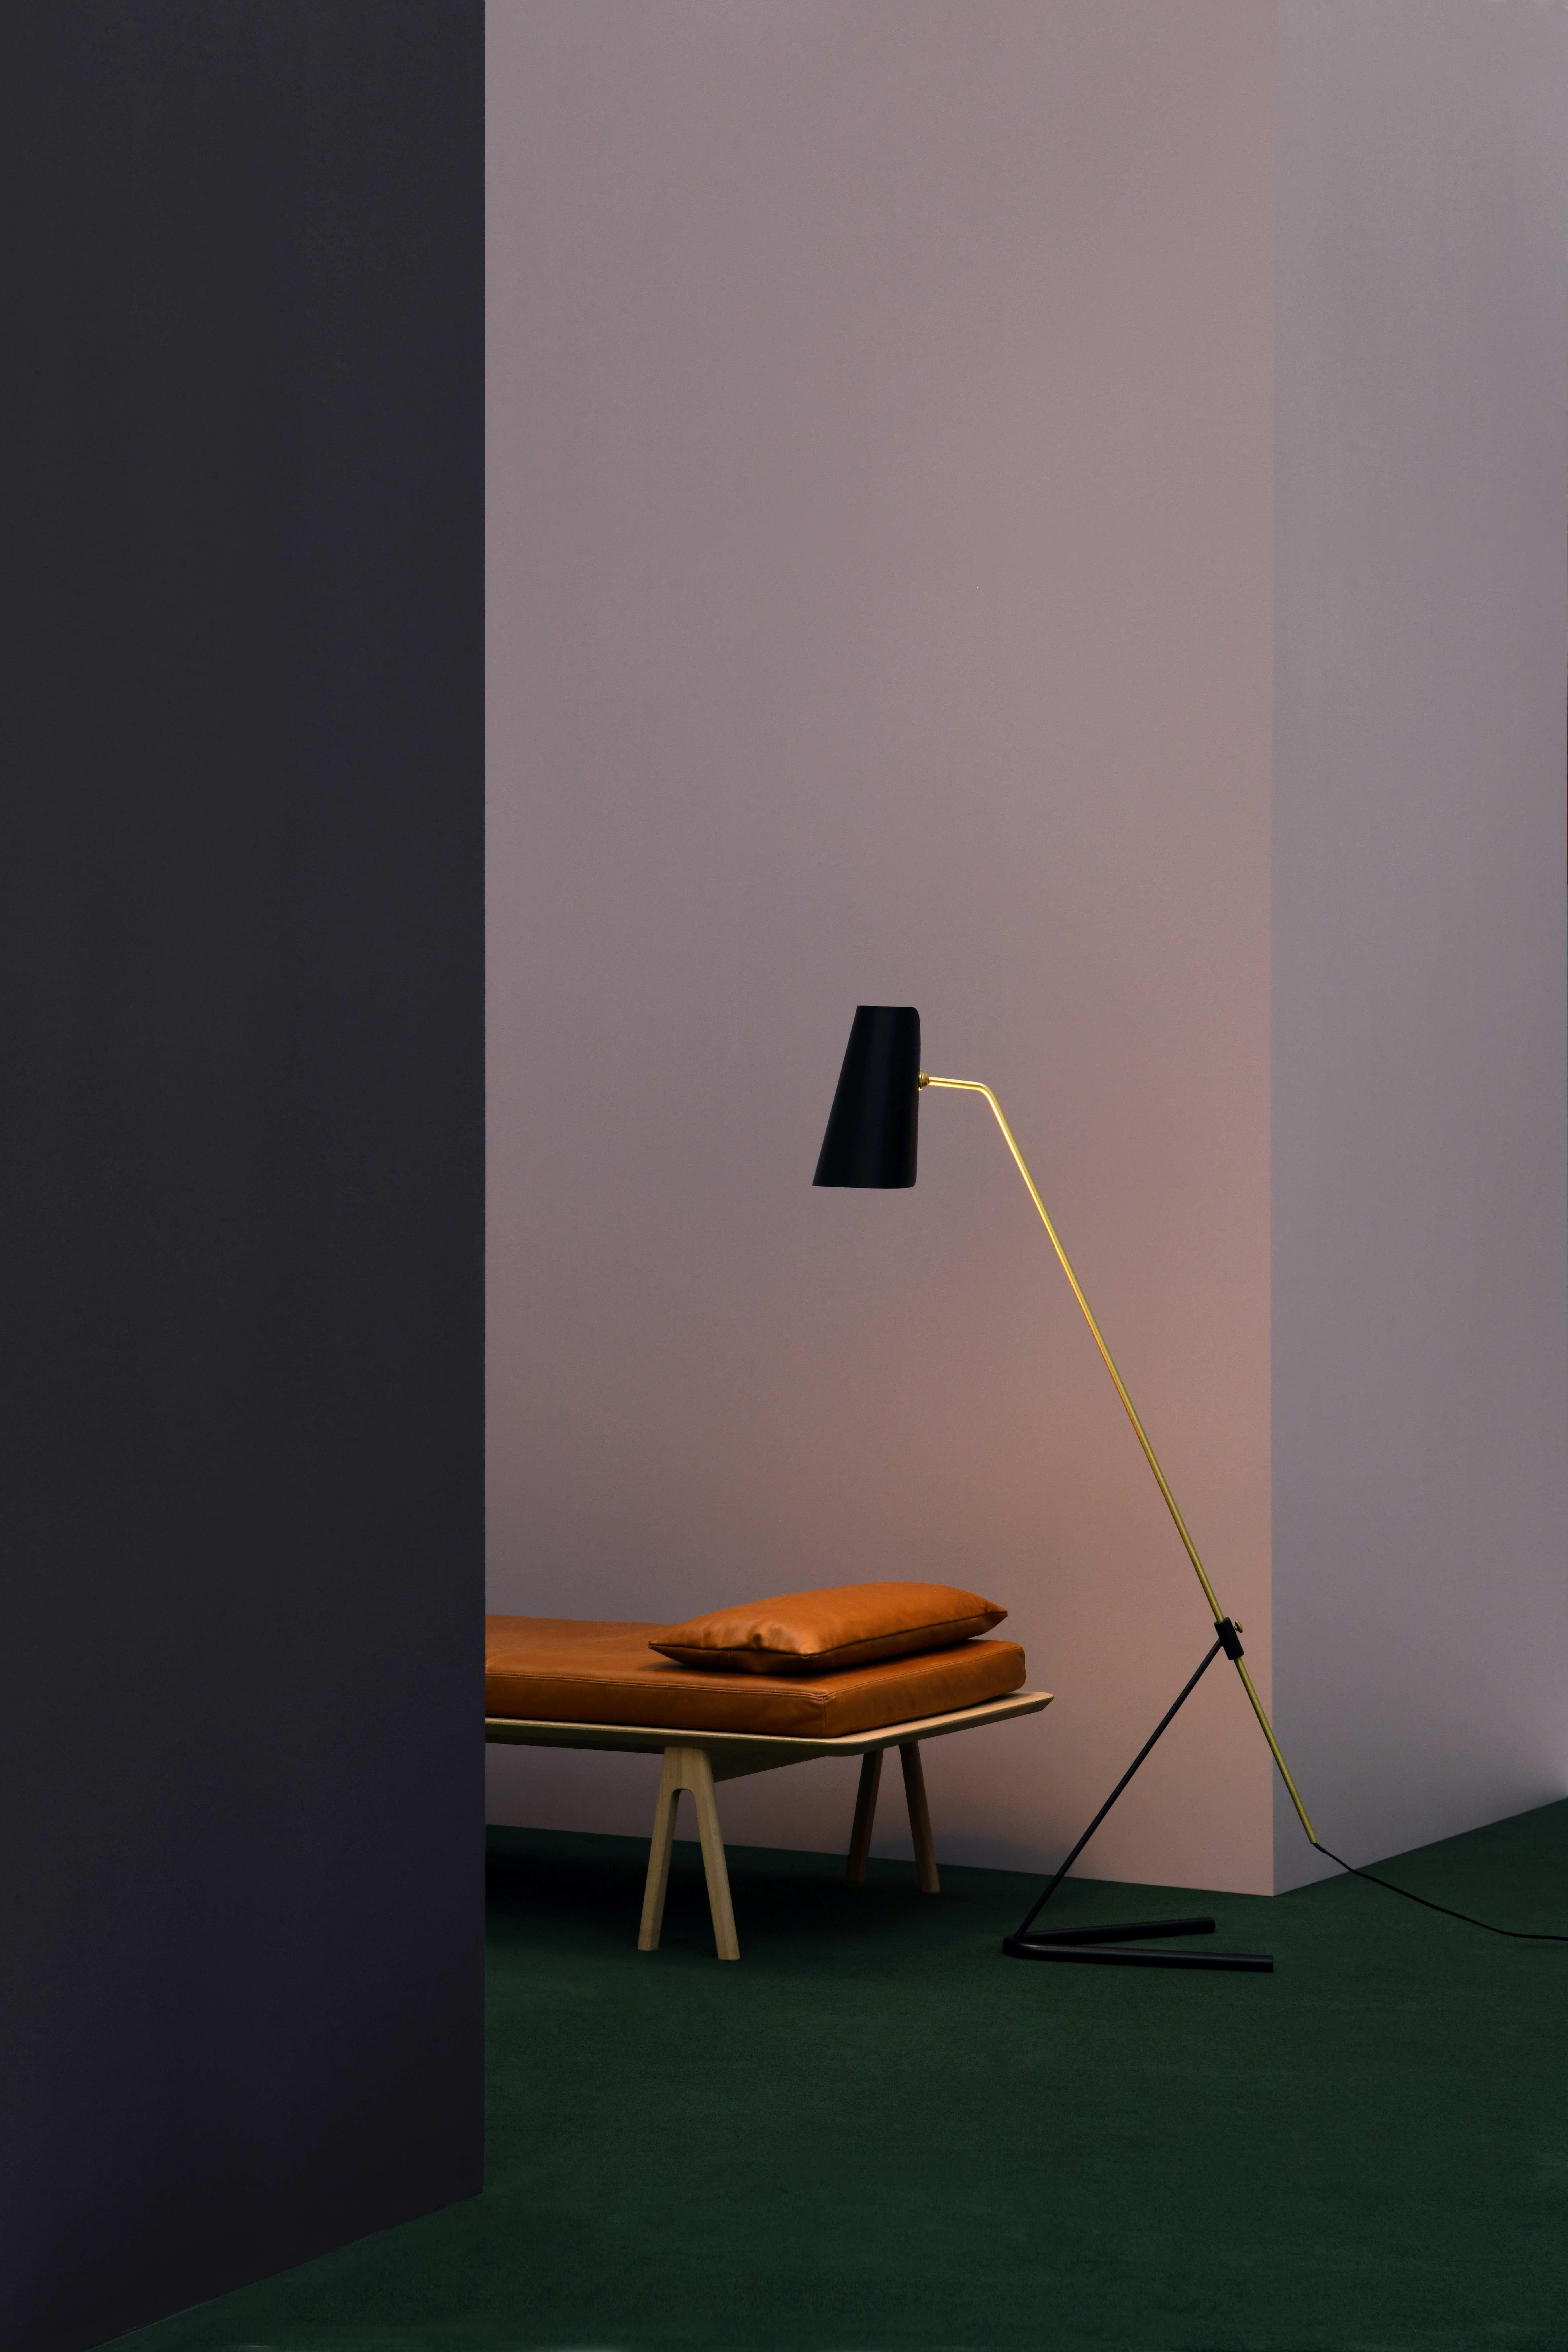 Pierre Guariche 'G21' floor lamp for Sammode Studio in black. 

Originally designed by Pierre Guariche in 1951, this iconic floor lamp is newly produced in an authorized re-edition by Sammode Studio in France embracing many of the same small-scale